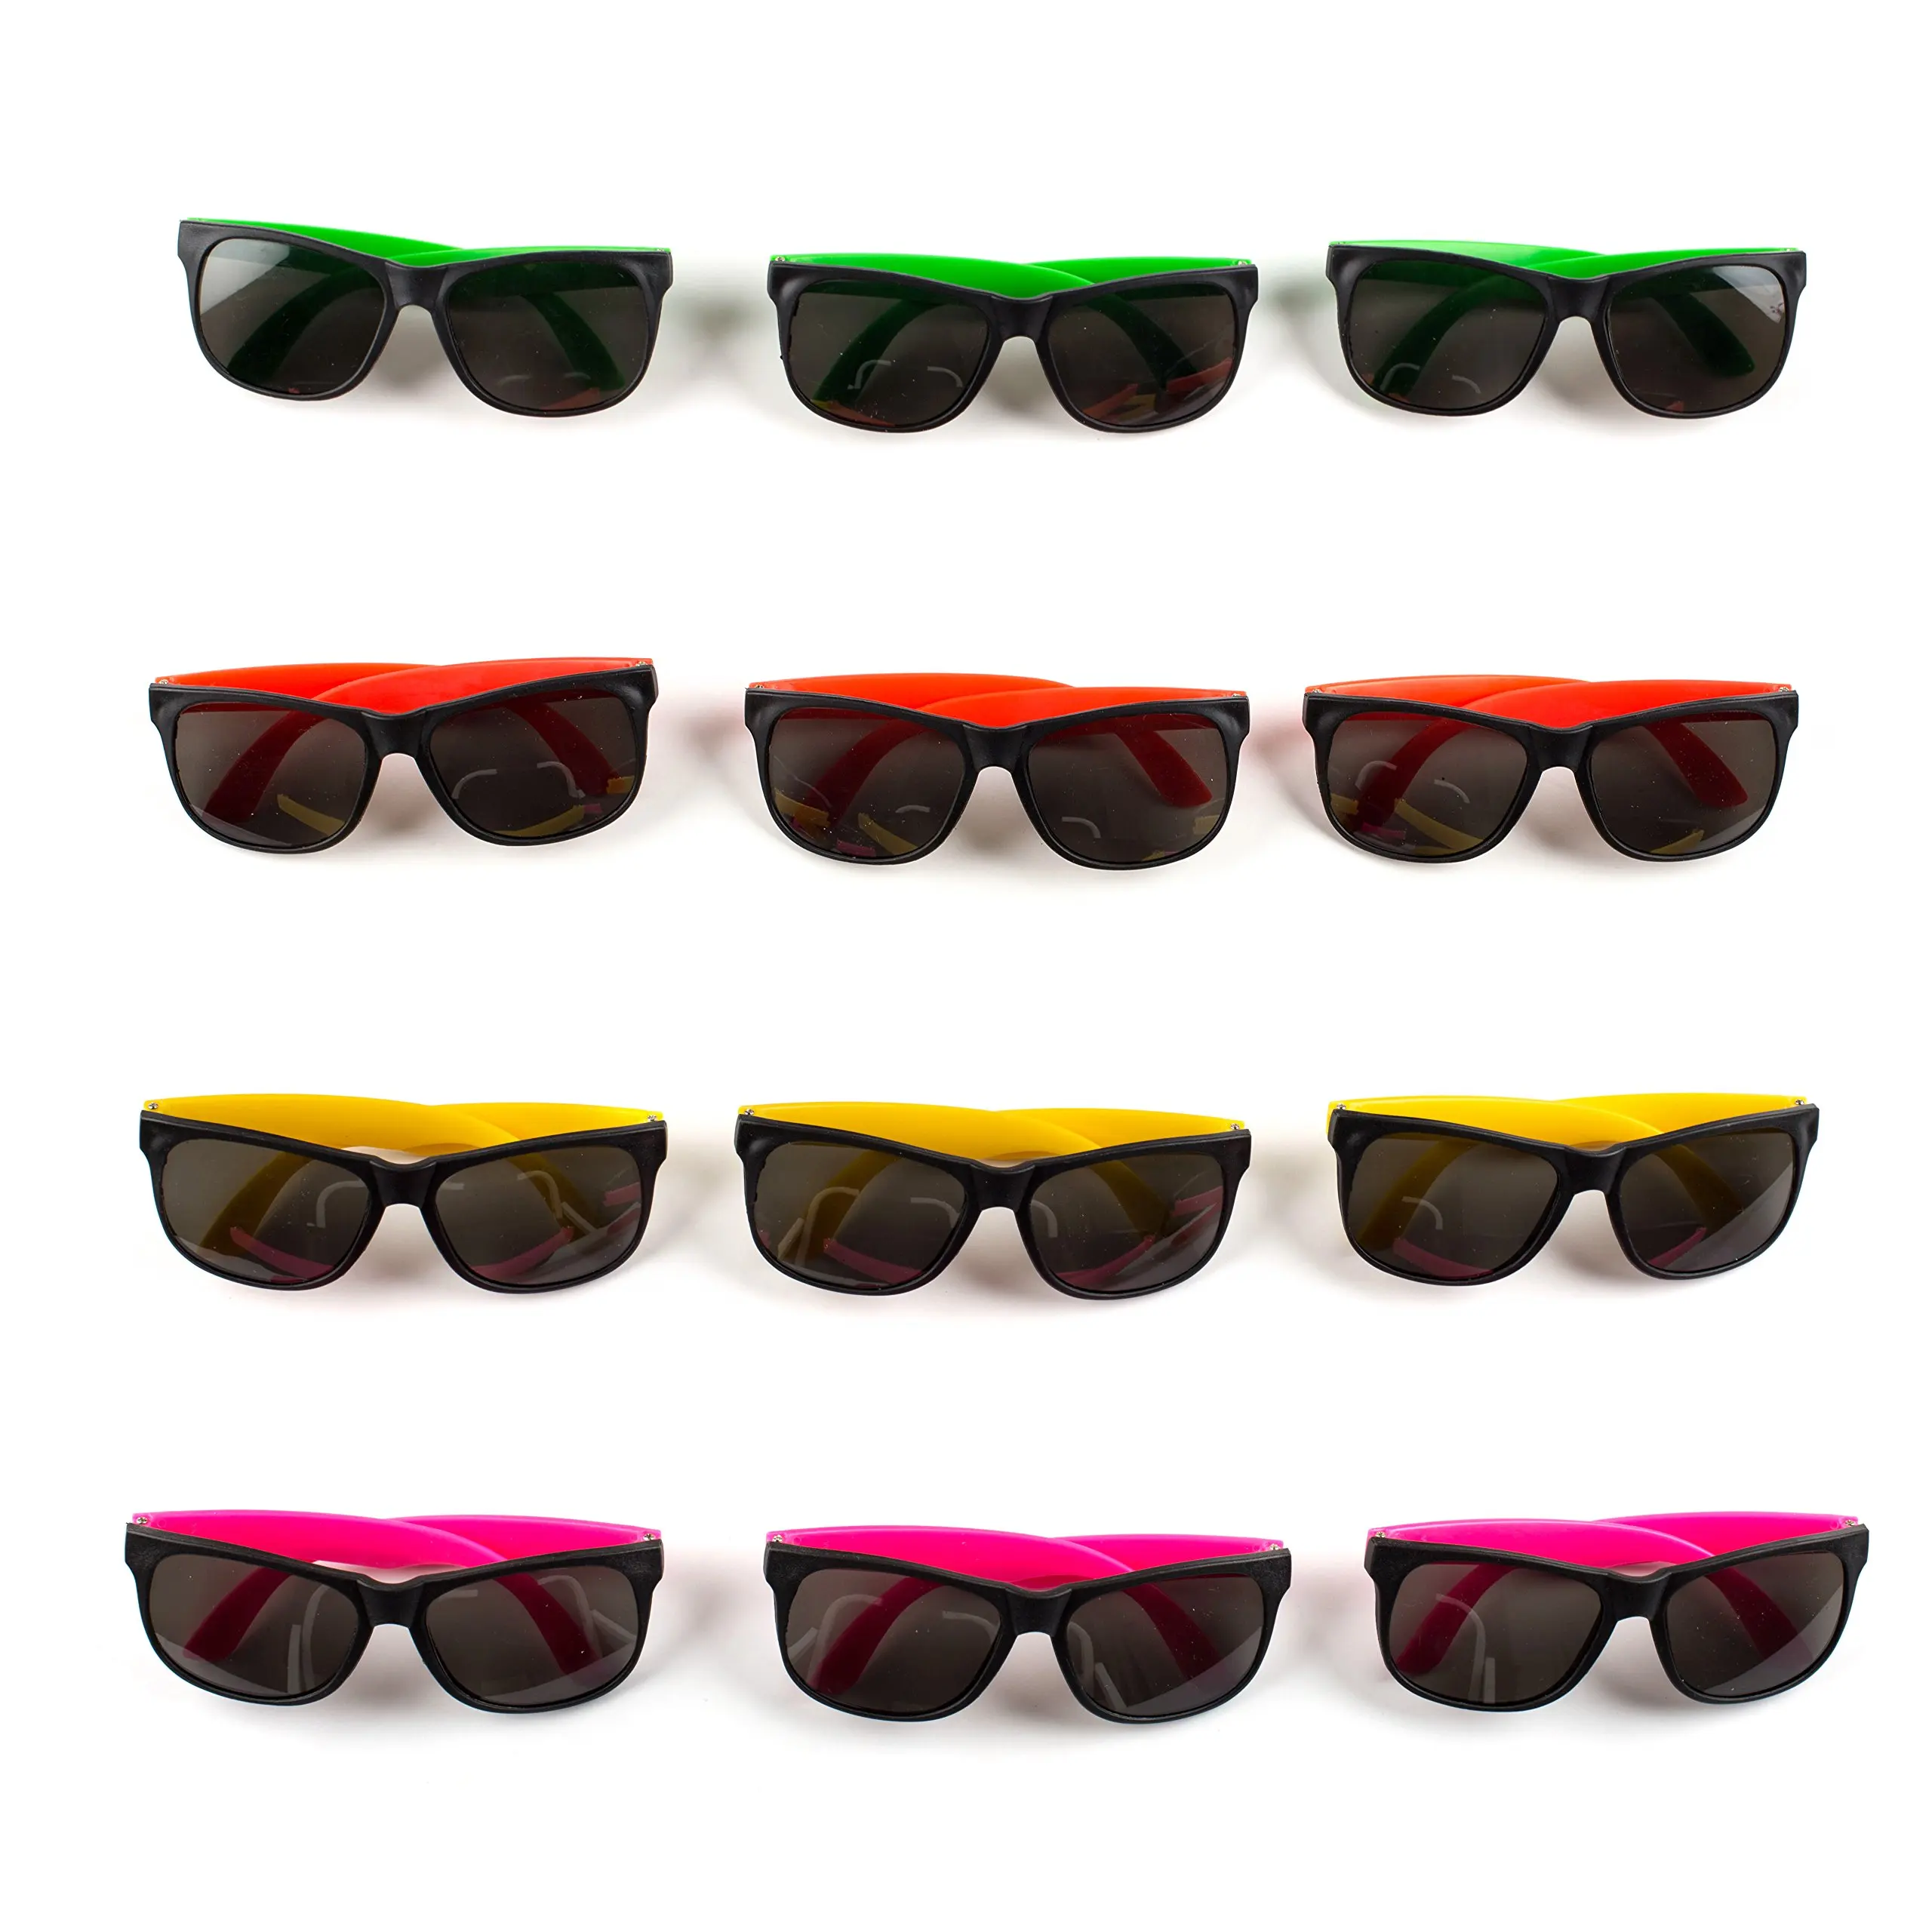 Goody Bag Filler Beach /& Pool Party Favors Bright Summer Colors 80s Party- 12 Classic 12 Wrap-Around Sunglasses Beach Party Favors Neon Bulk Kids /& Adults Sunglasses Party Favors 24 Pack Birthday /& Fun Parties Supplies Goody Bag Filler By 4Es